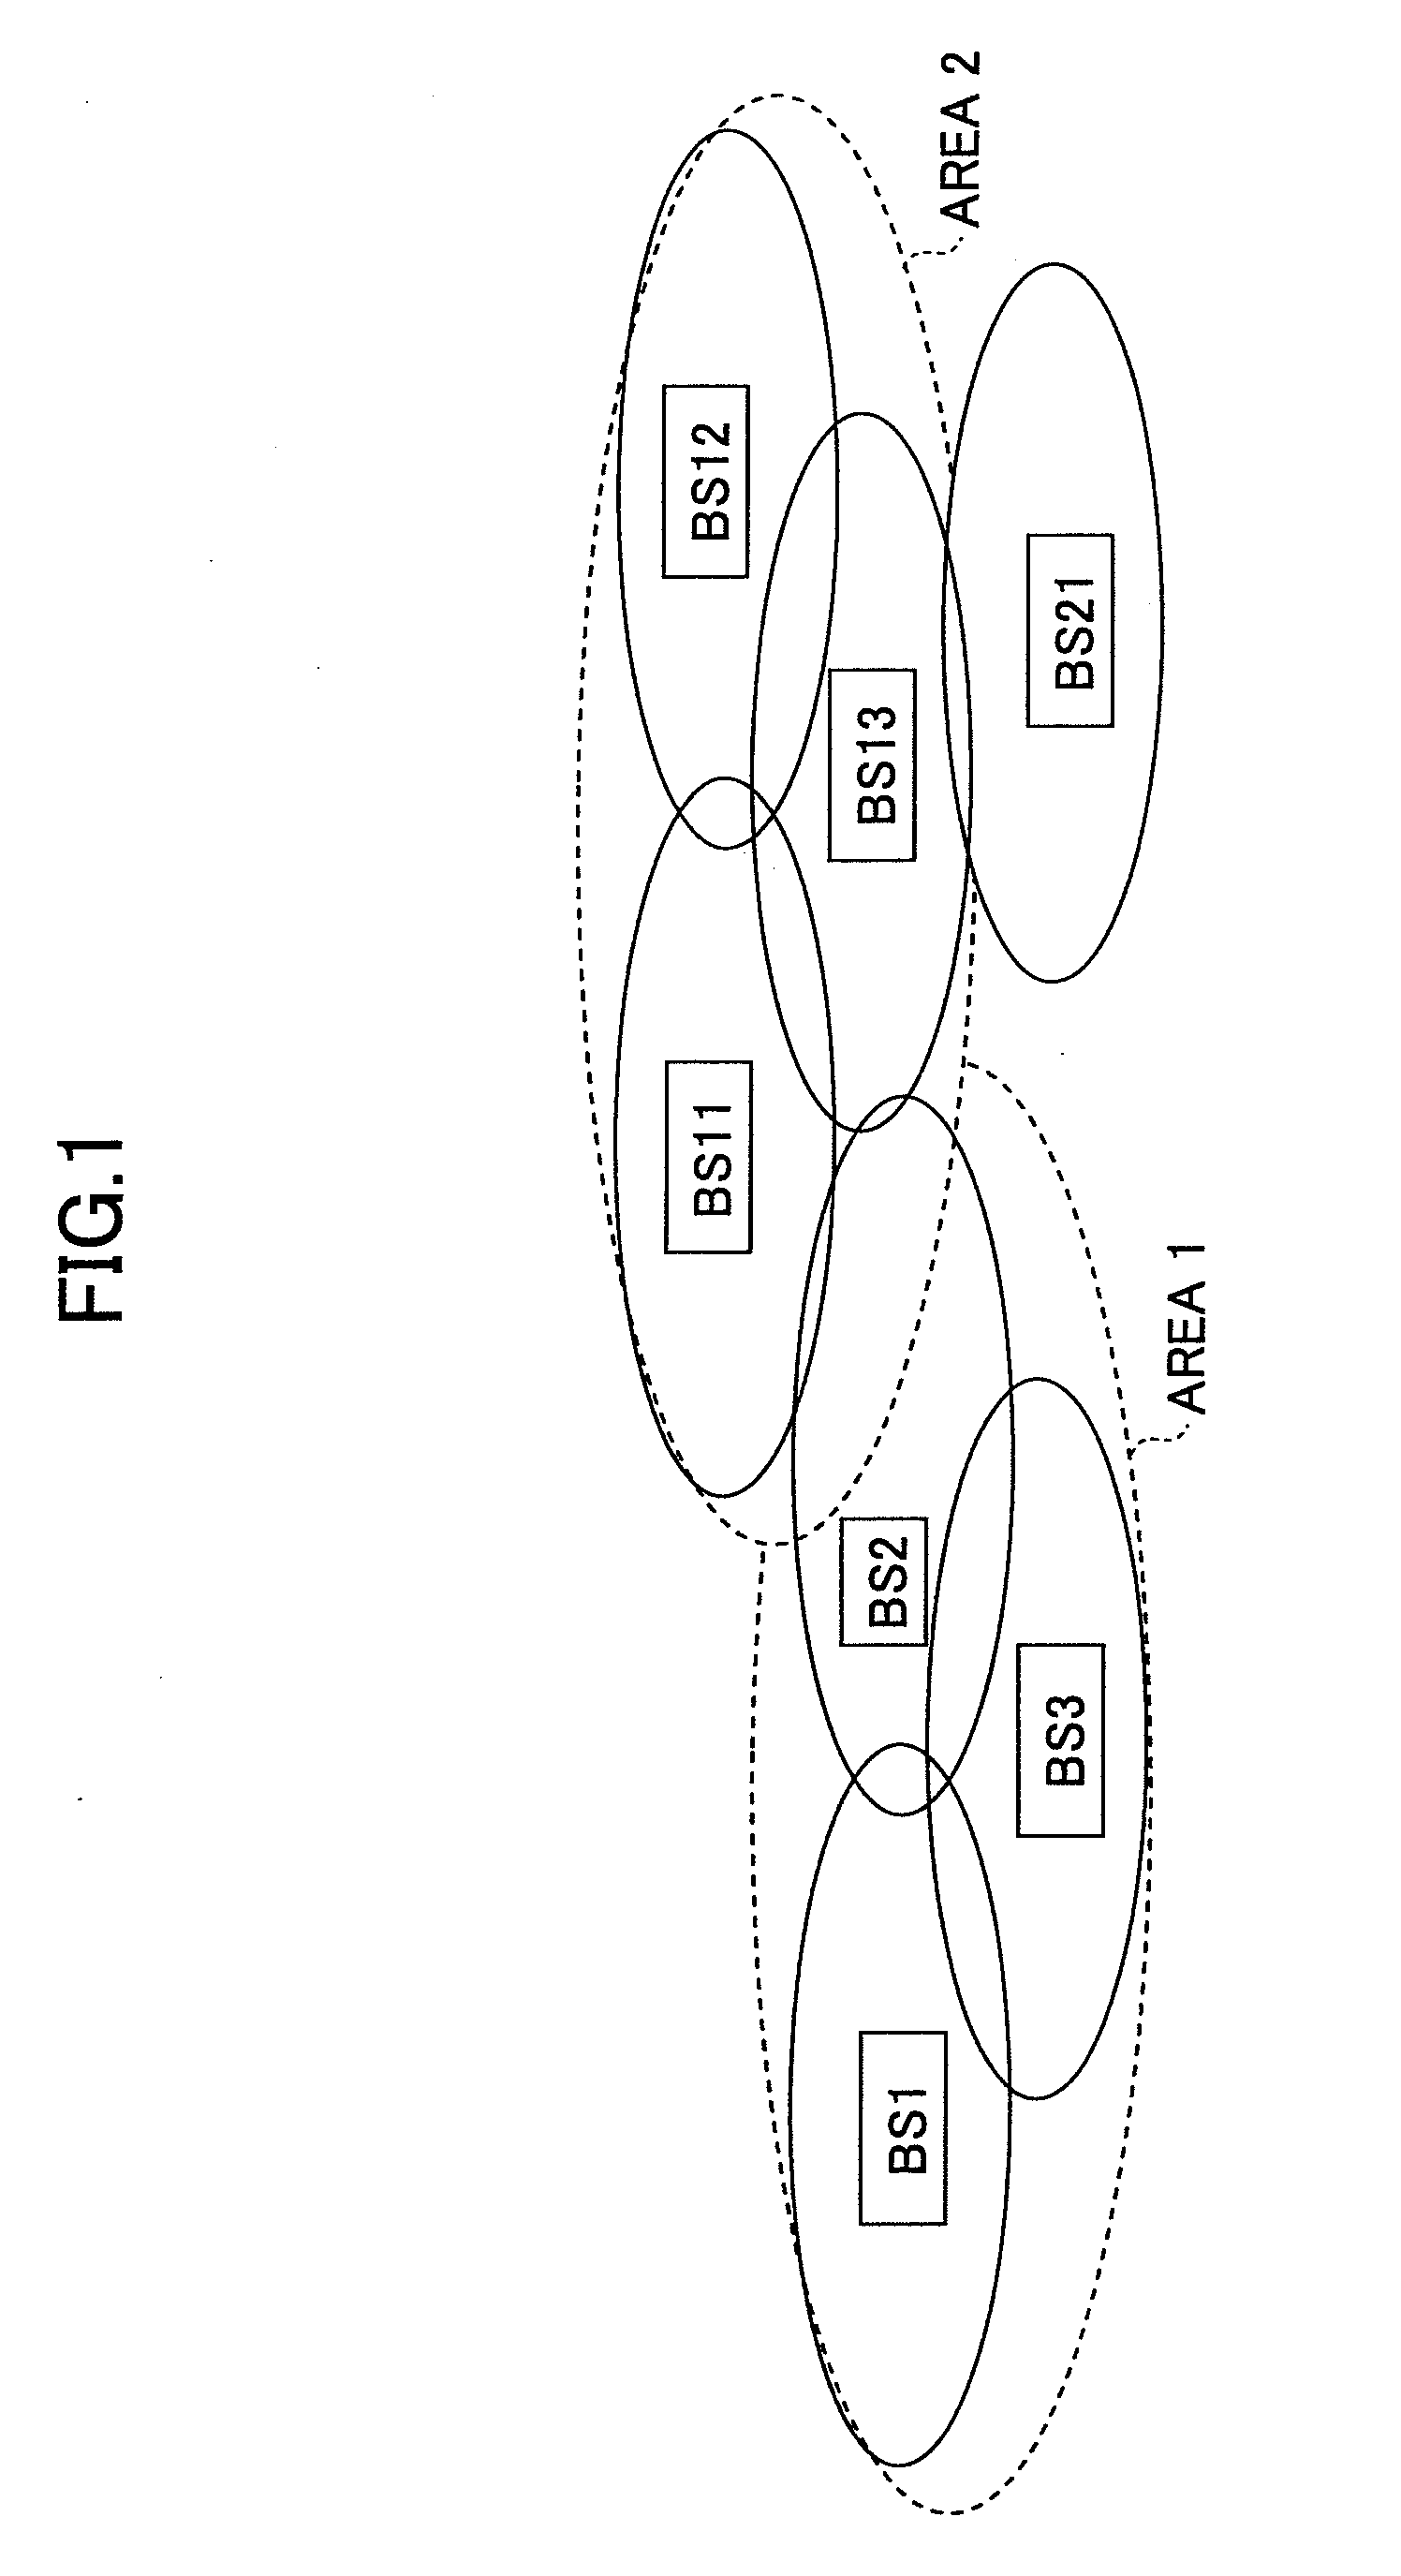 Transmitting and receiving apparatuses and methods